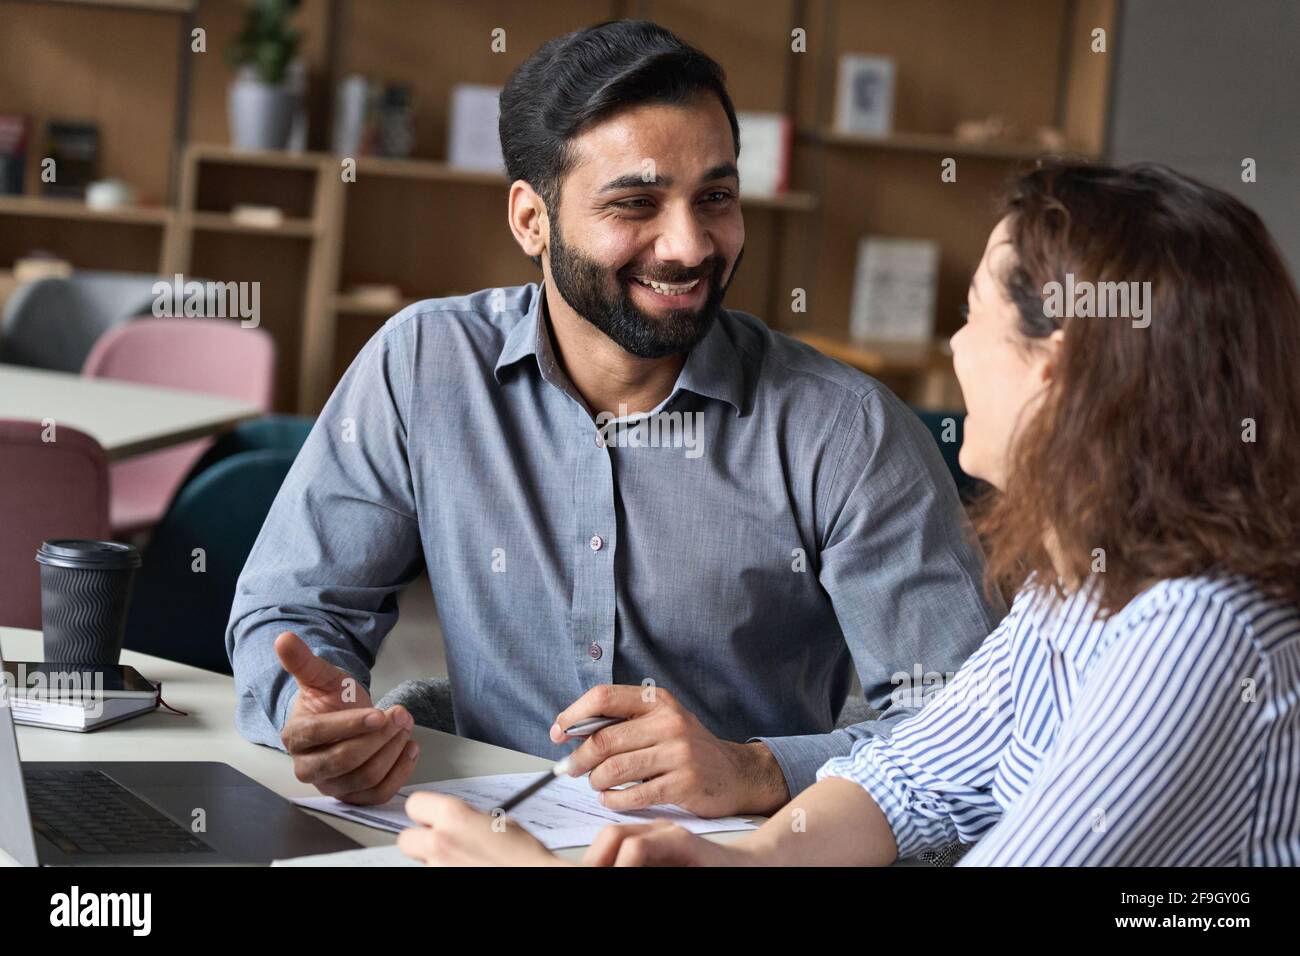 Multiethnic interview of happy smiling hr manager and young professional. Stock Photo